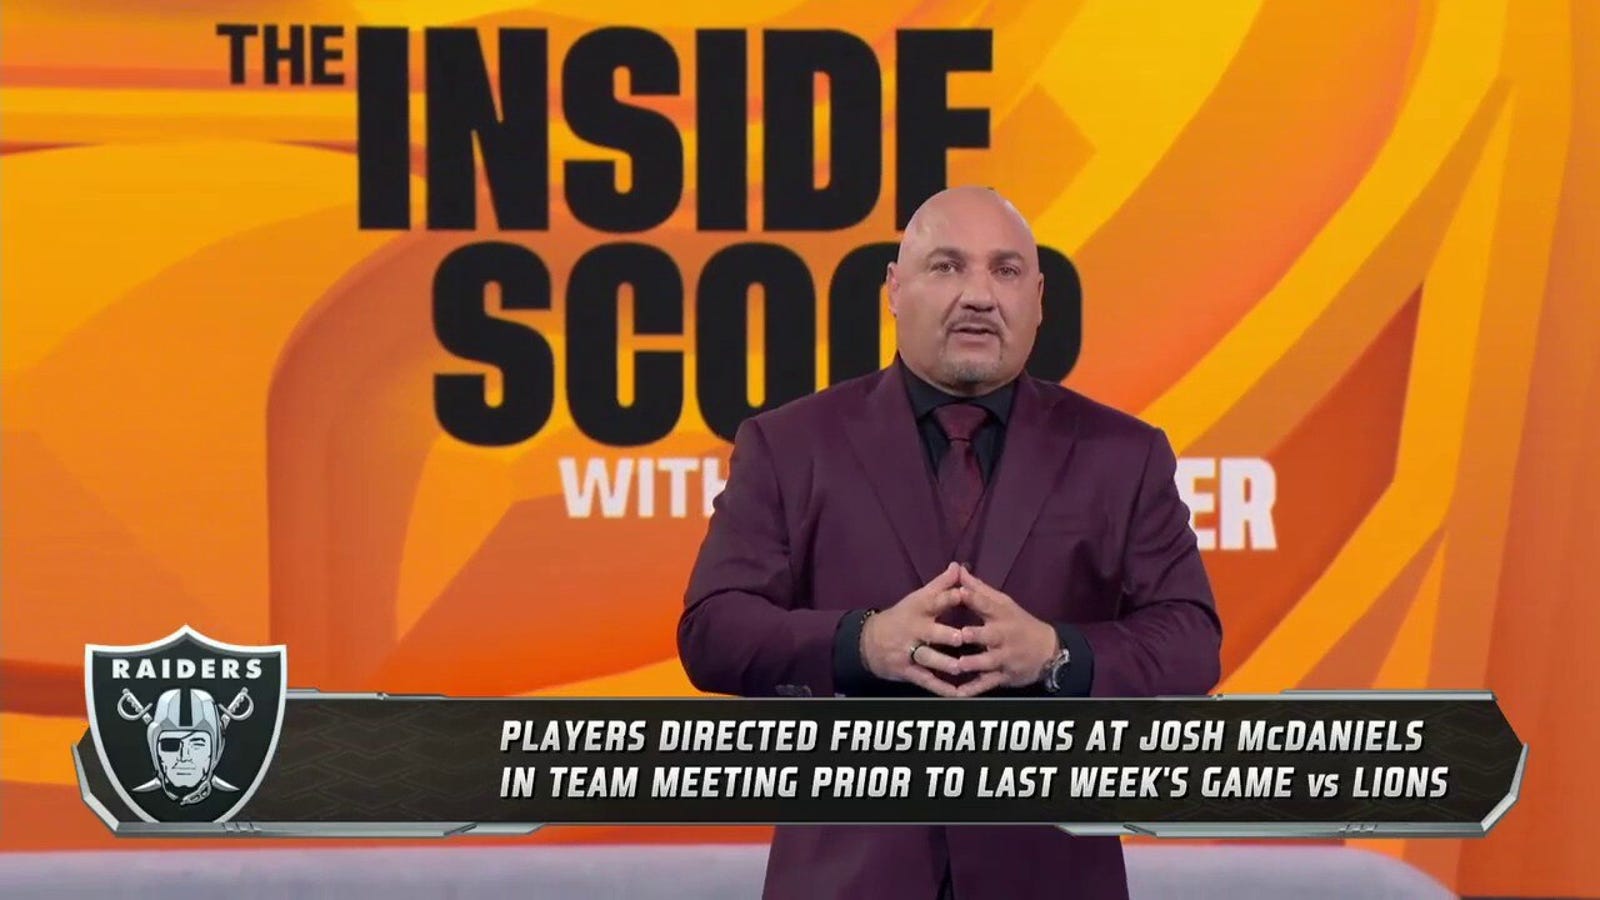 Jay Glazer breaks down details of what led up to Raiders' decision to part ways with Josh McDaniels